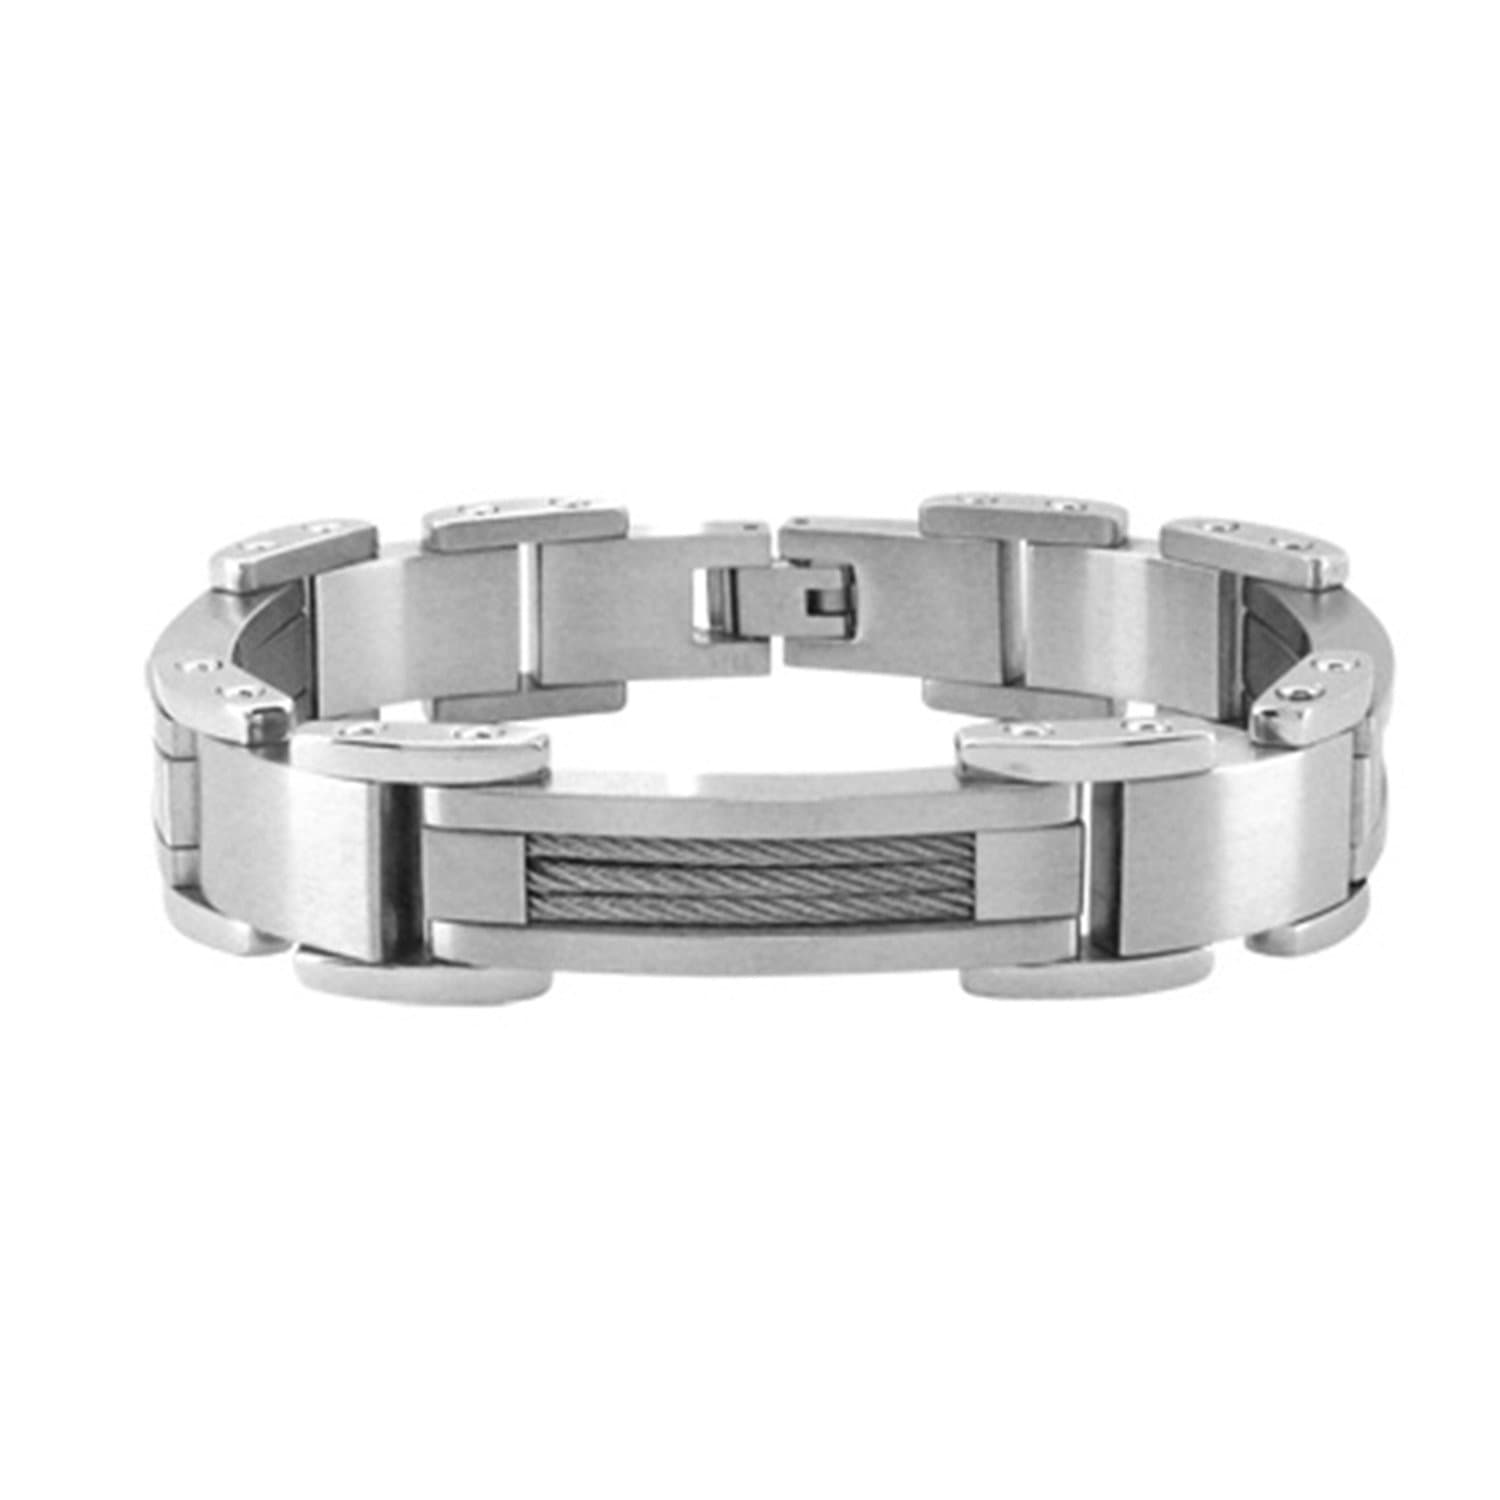 INOX JEWELRY Bracelets Silver Tone Stainless Steel Matte and Polished Industrial Cable Bracelet BR4199